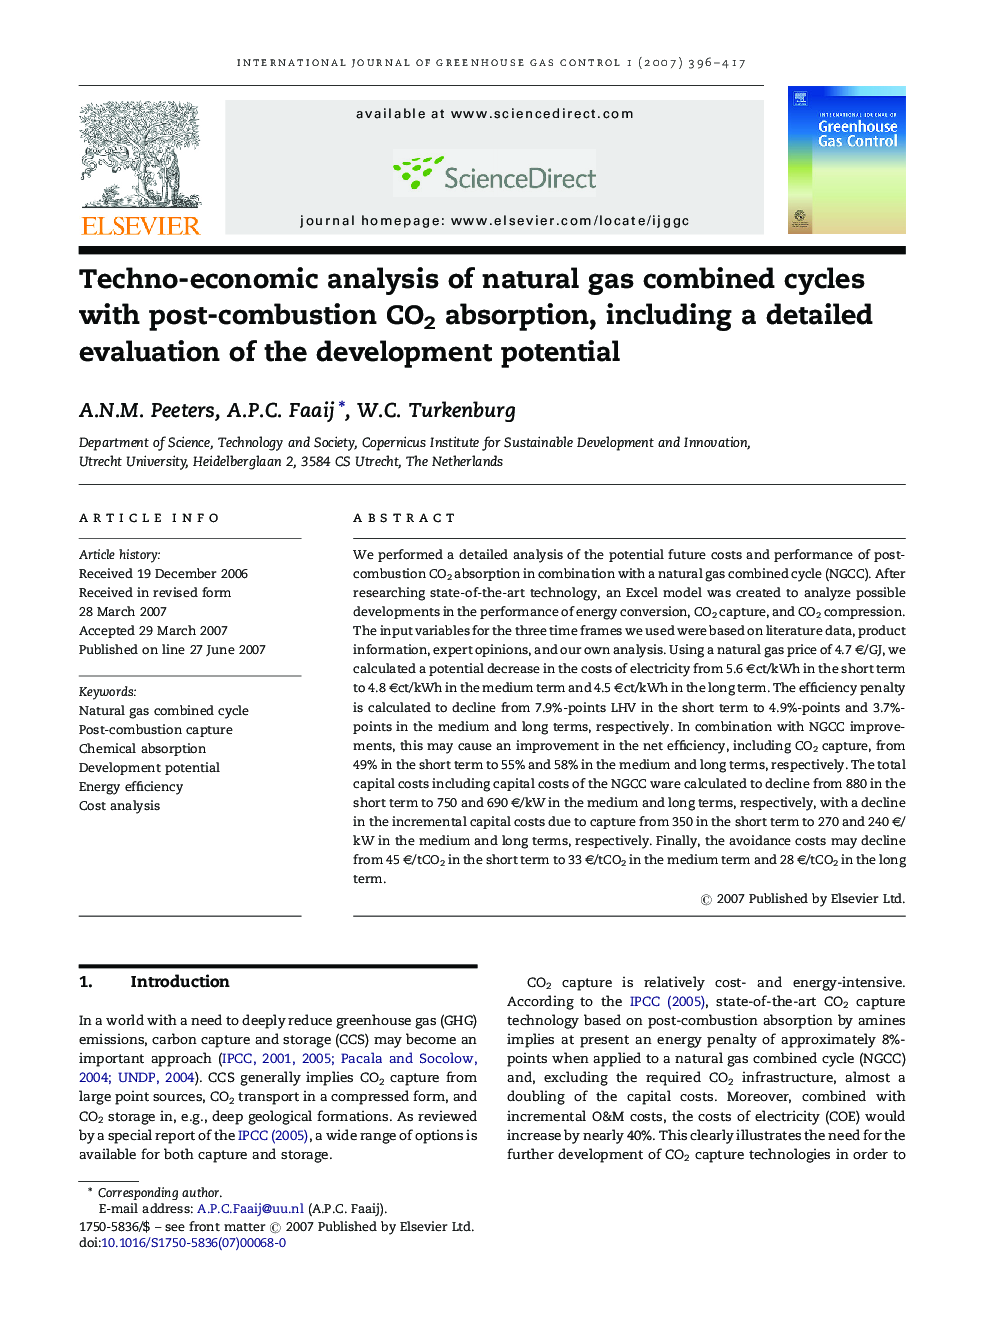 Techno-economic analysis of natural gas combined cycles with post-combustion CO2 absorption, including a detailed evaluation of the development potential